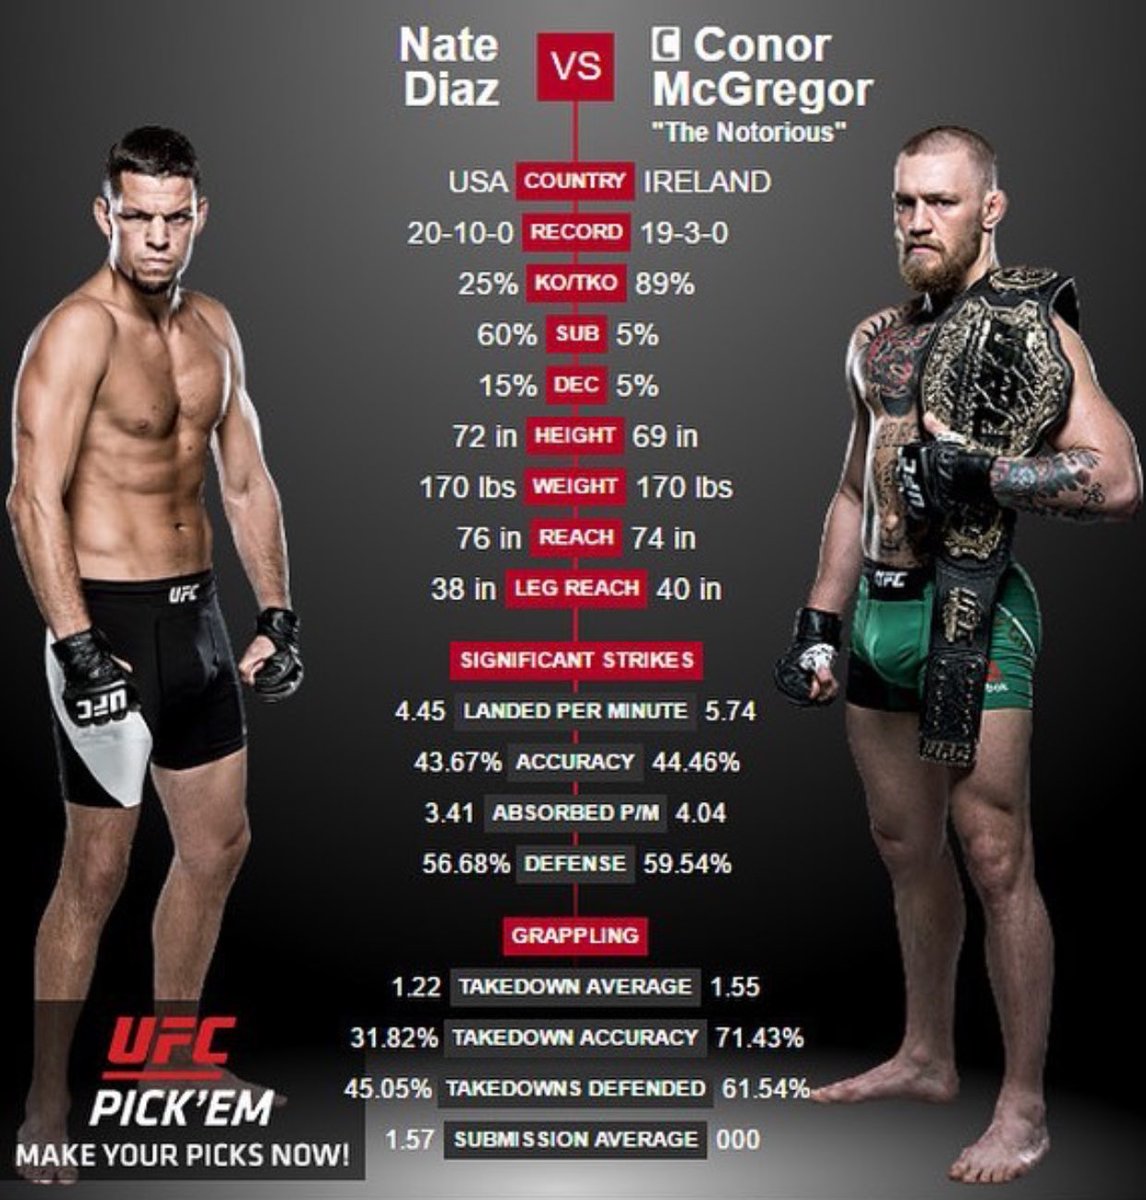 RT @DaRealPepa: Who you got? #ImWithMcGregor or #ImWithDiaz #UFC https://t.co/7Pde39F8Zl